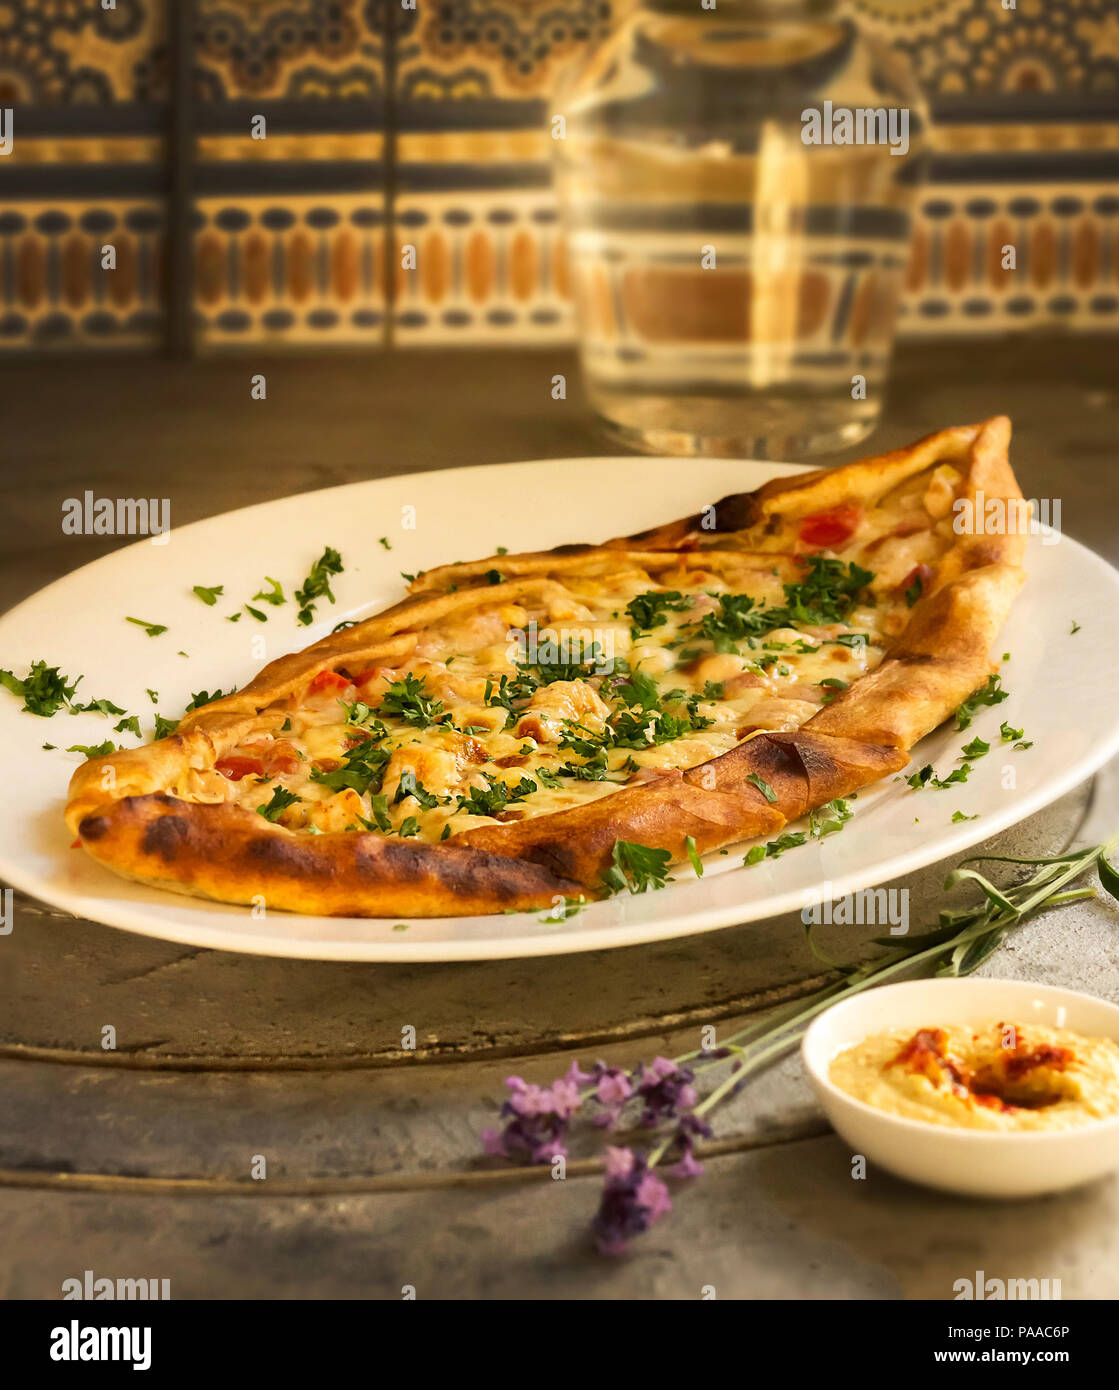 A hot pizza with chicken, cheese and greens lies on a plate. Next to the bowl with sauce and a branch of lavender Stock Photo